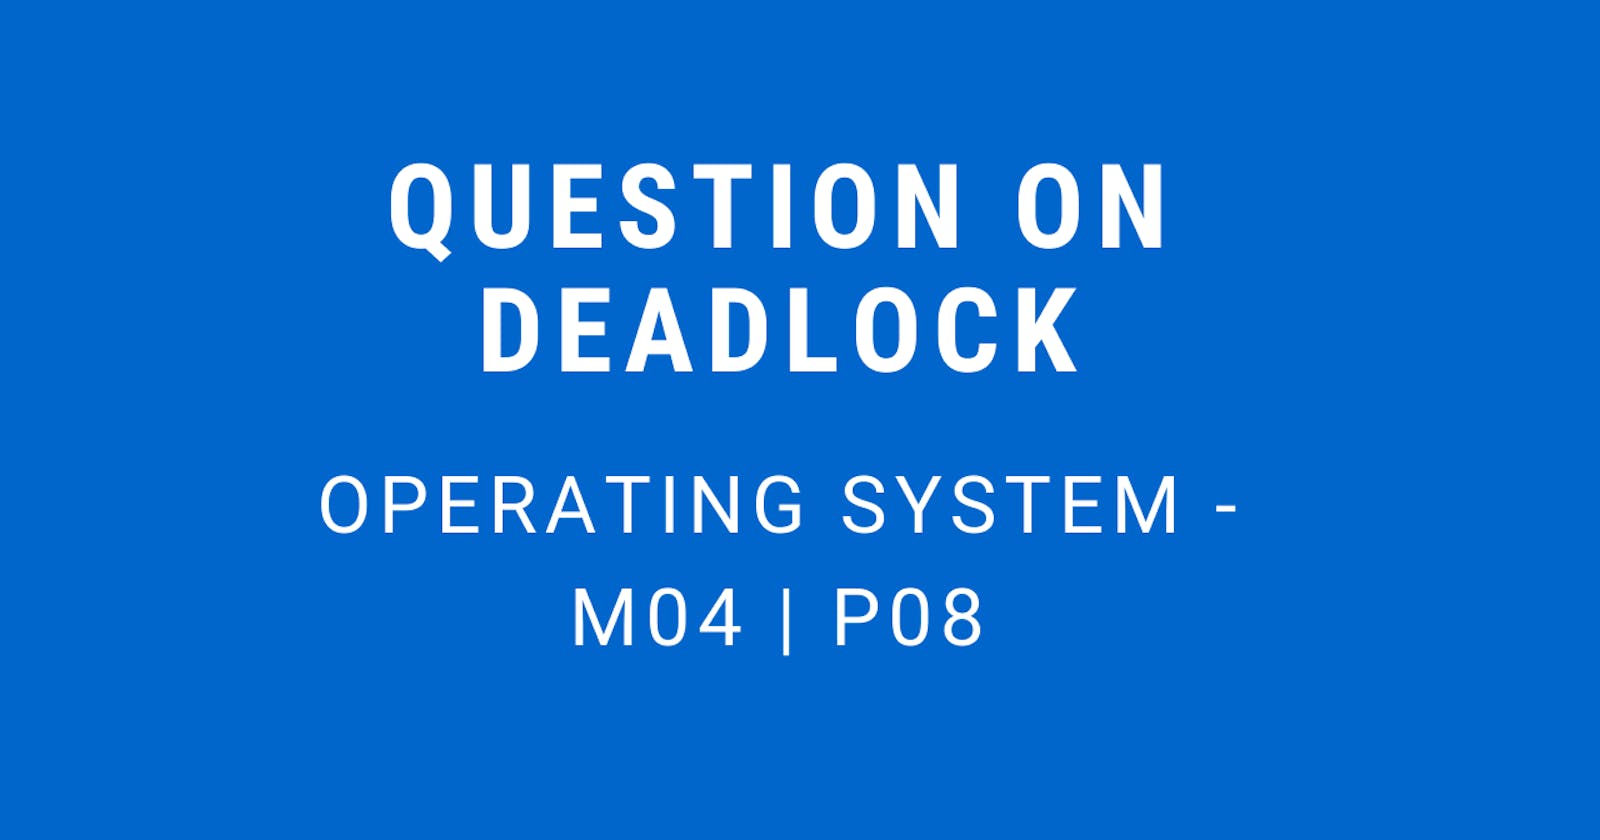 Question on Deadlock | Operating System - M04 P08